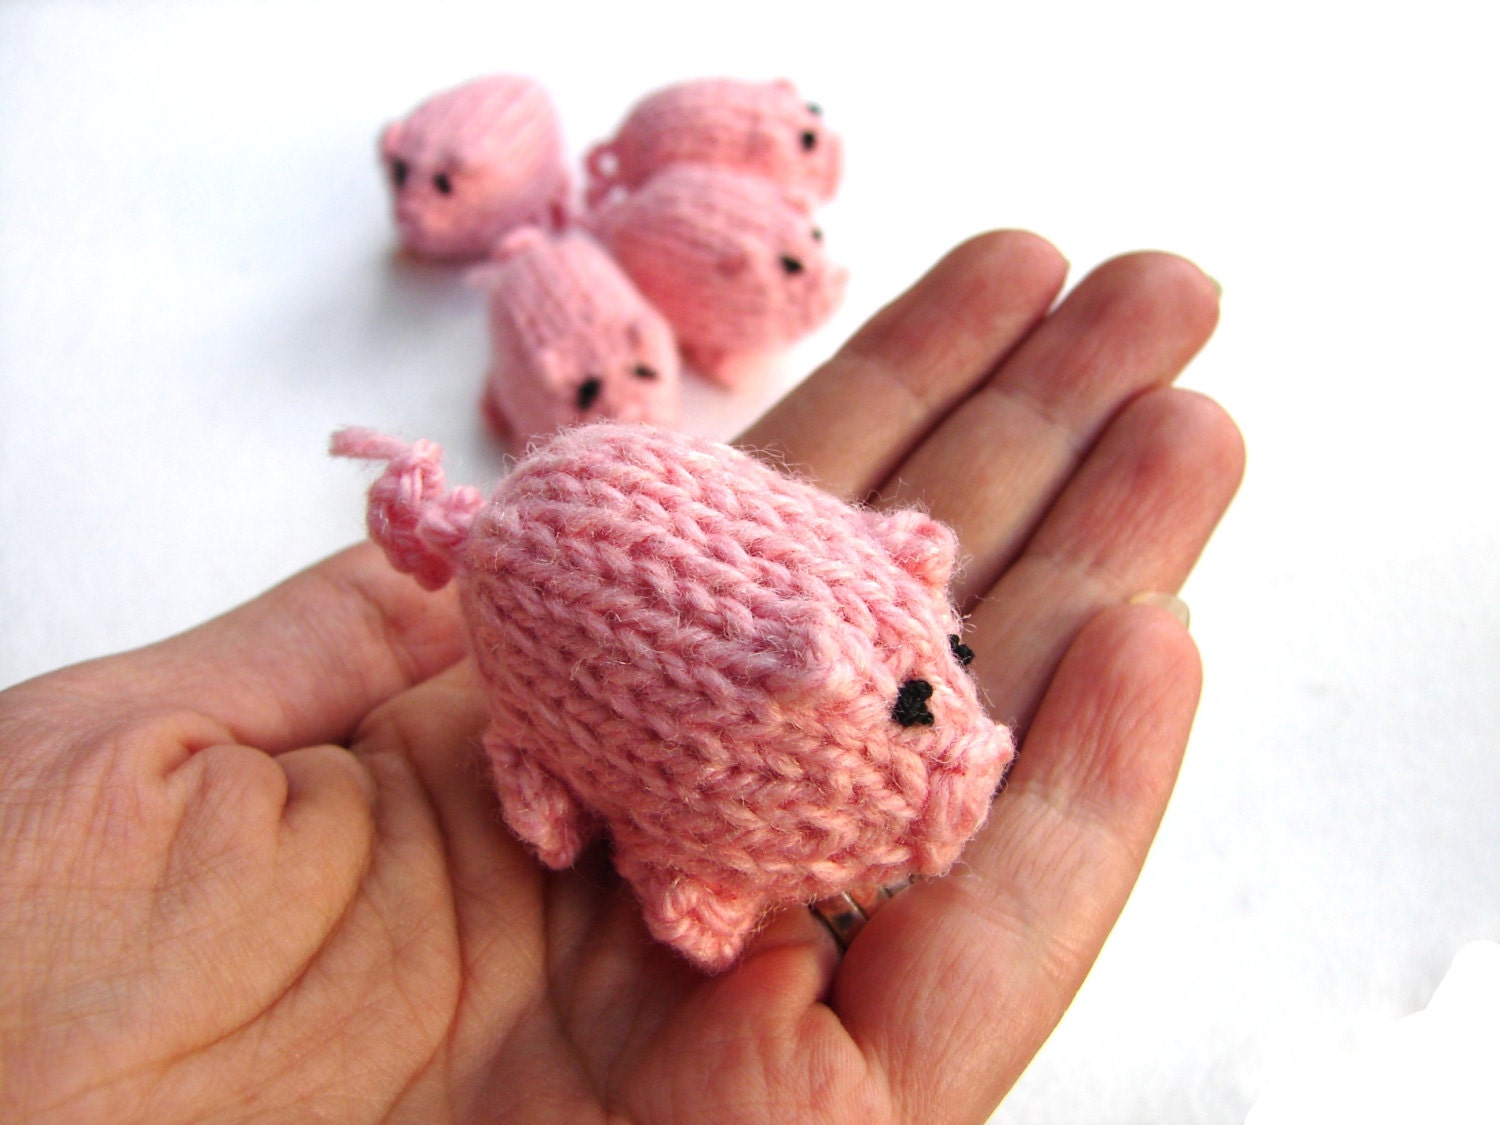 Pink piggy knitted baby toy, 3 little pigs stuffed toy - TinyOrchids